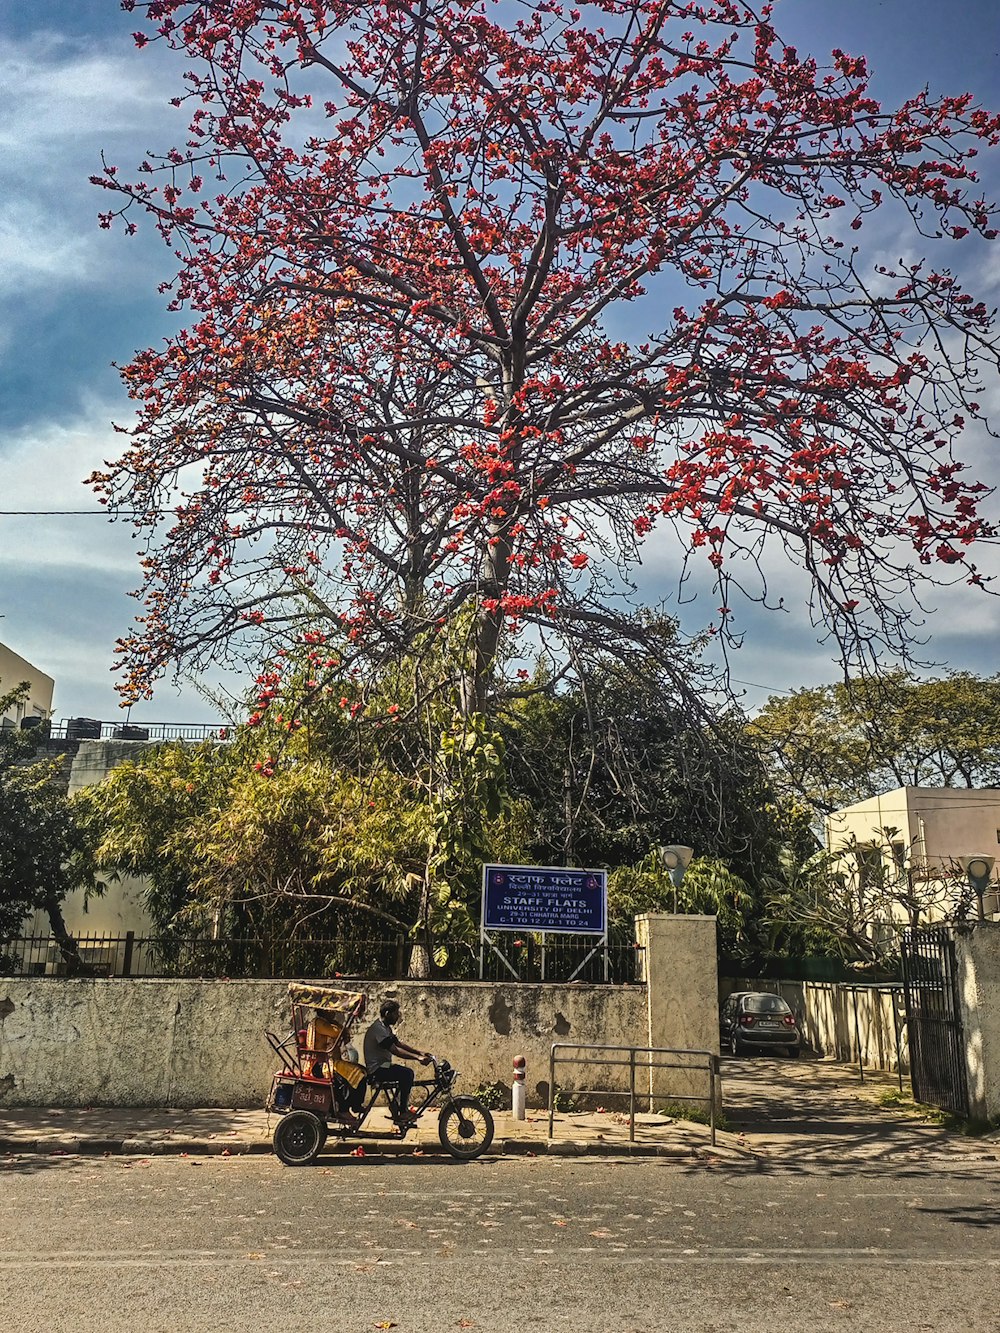 a motorcycle parked next to a tree with red flowers